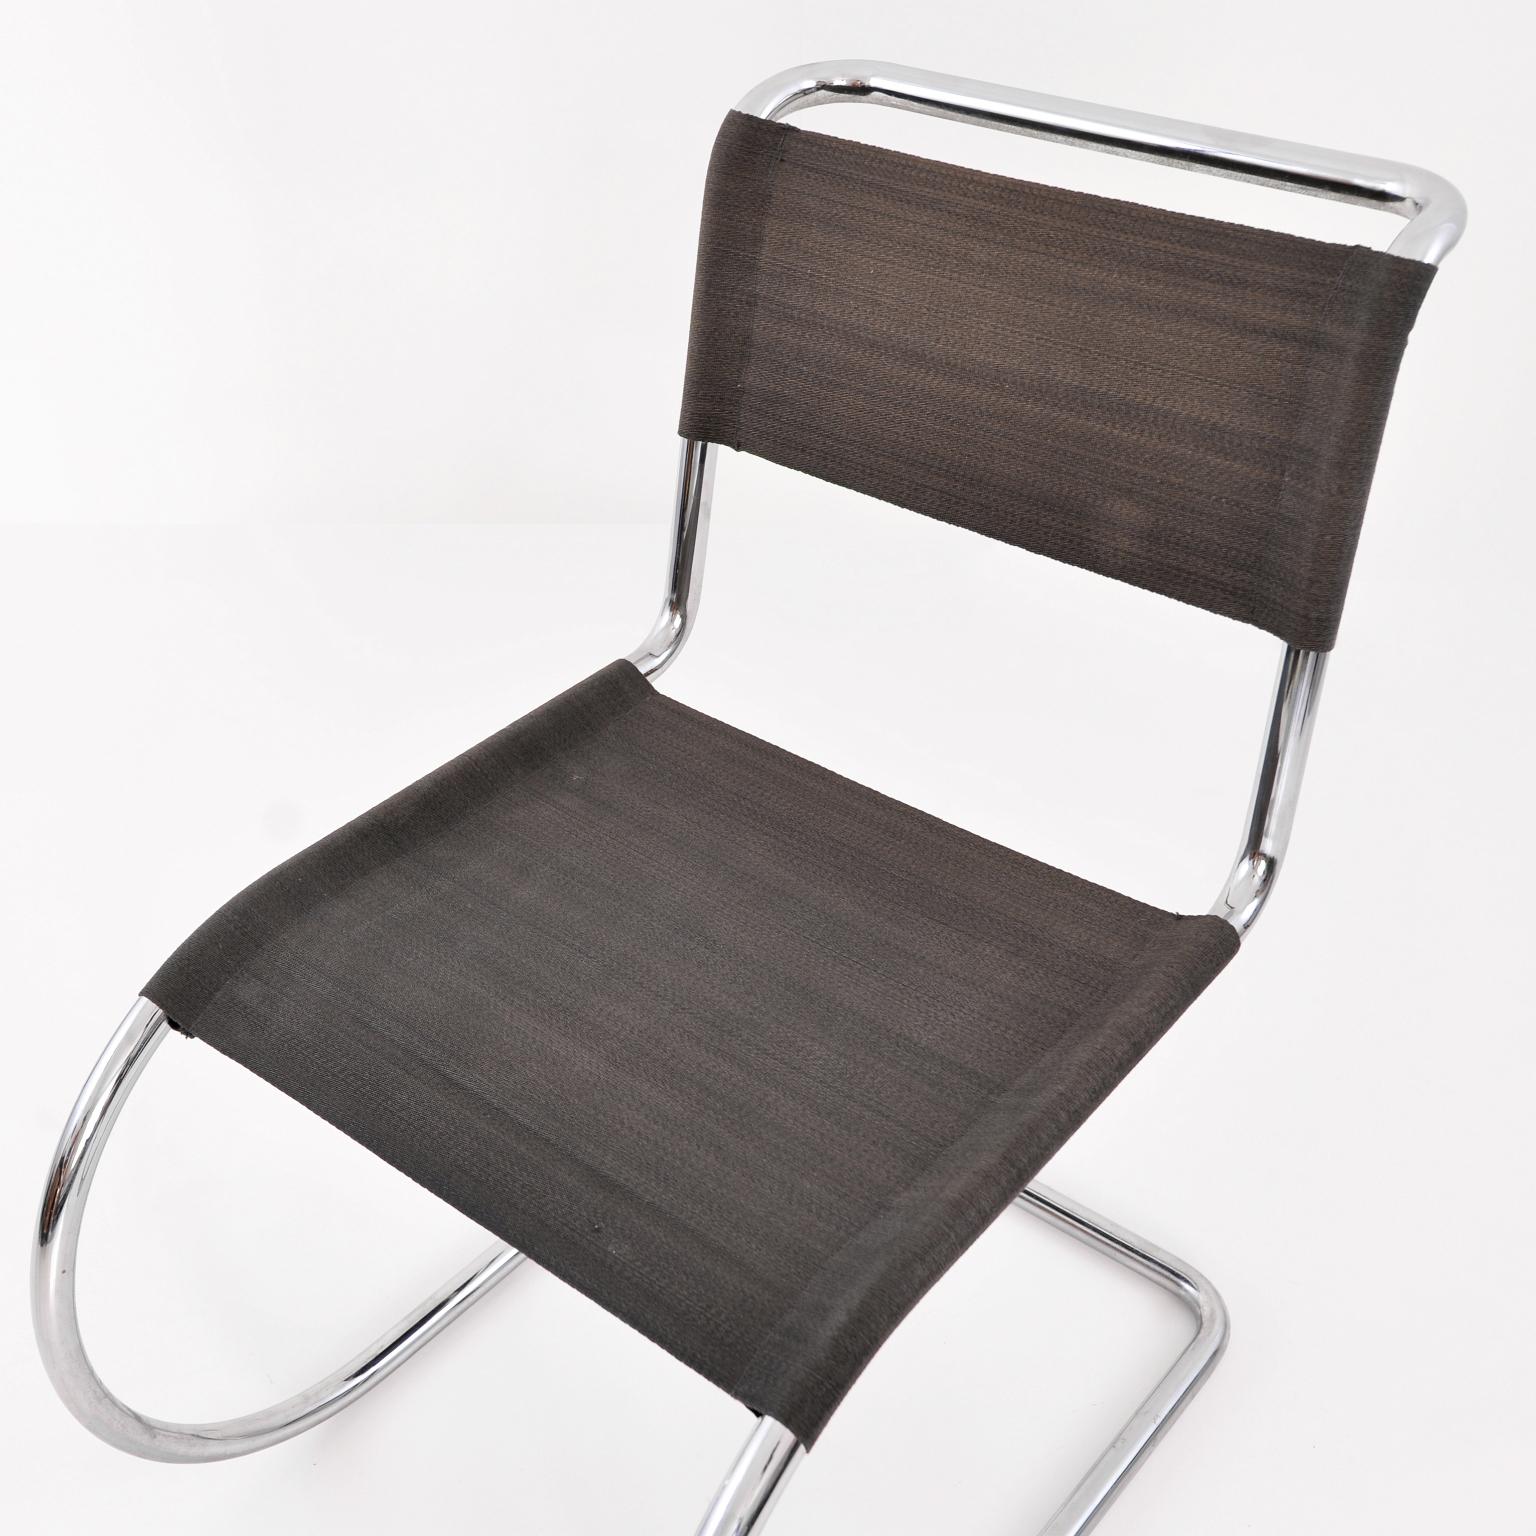 Mid-20th Century Ludwig Mies van der Rohe Weißenhof Mr 10 / Mr 533 Chairs Manufactured by Thonet For Sale